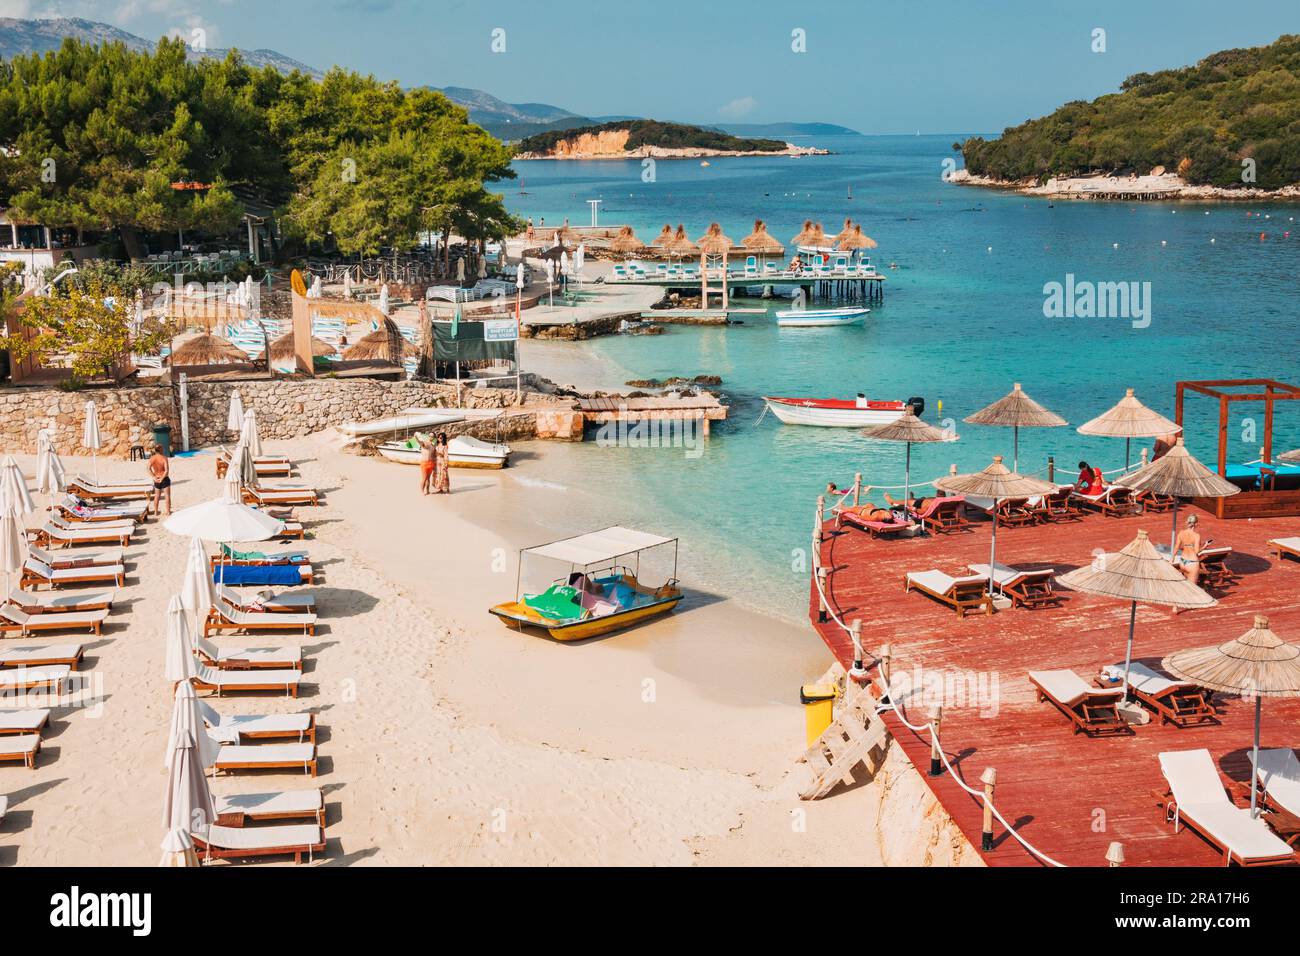 loungers, sun umbrellas, a wooden bathing deck and turquoise blue waters waiting for tourists at Rilinda Beach, Ksamil, Albania Stock Photo